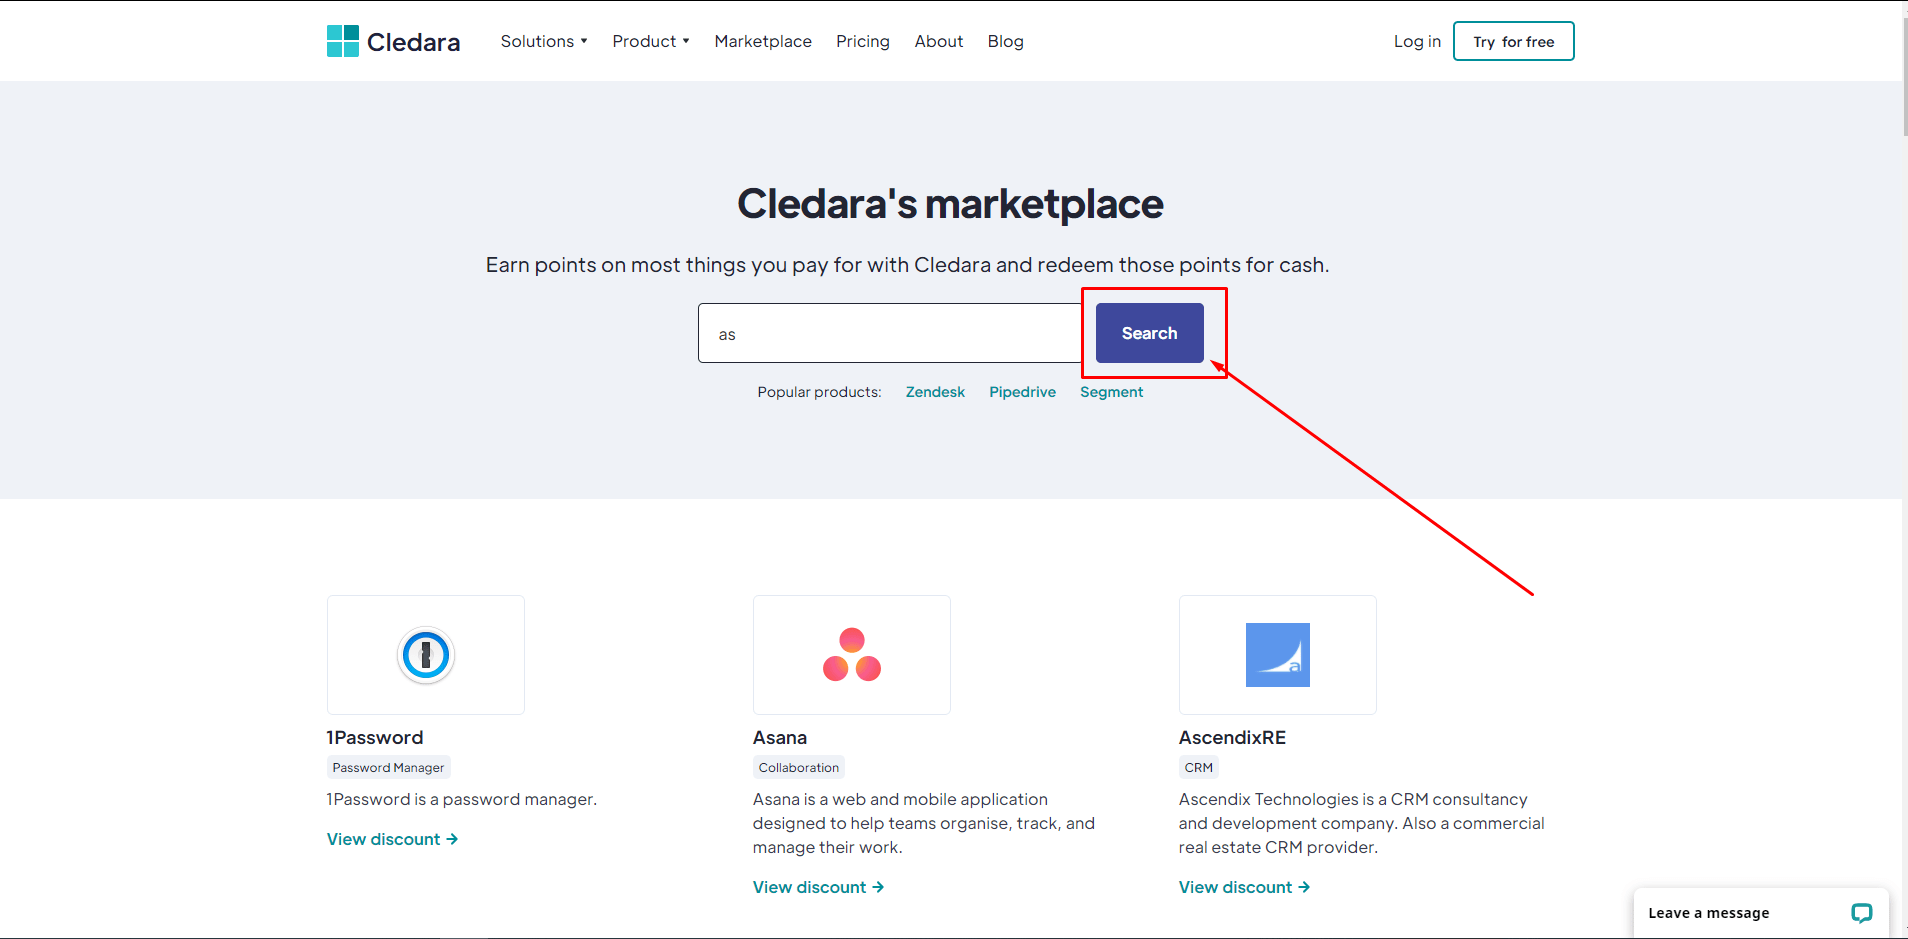 The “Search” button on the “Marketplace” page is not responsive